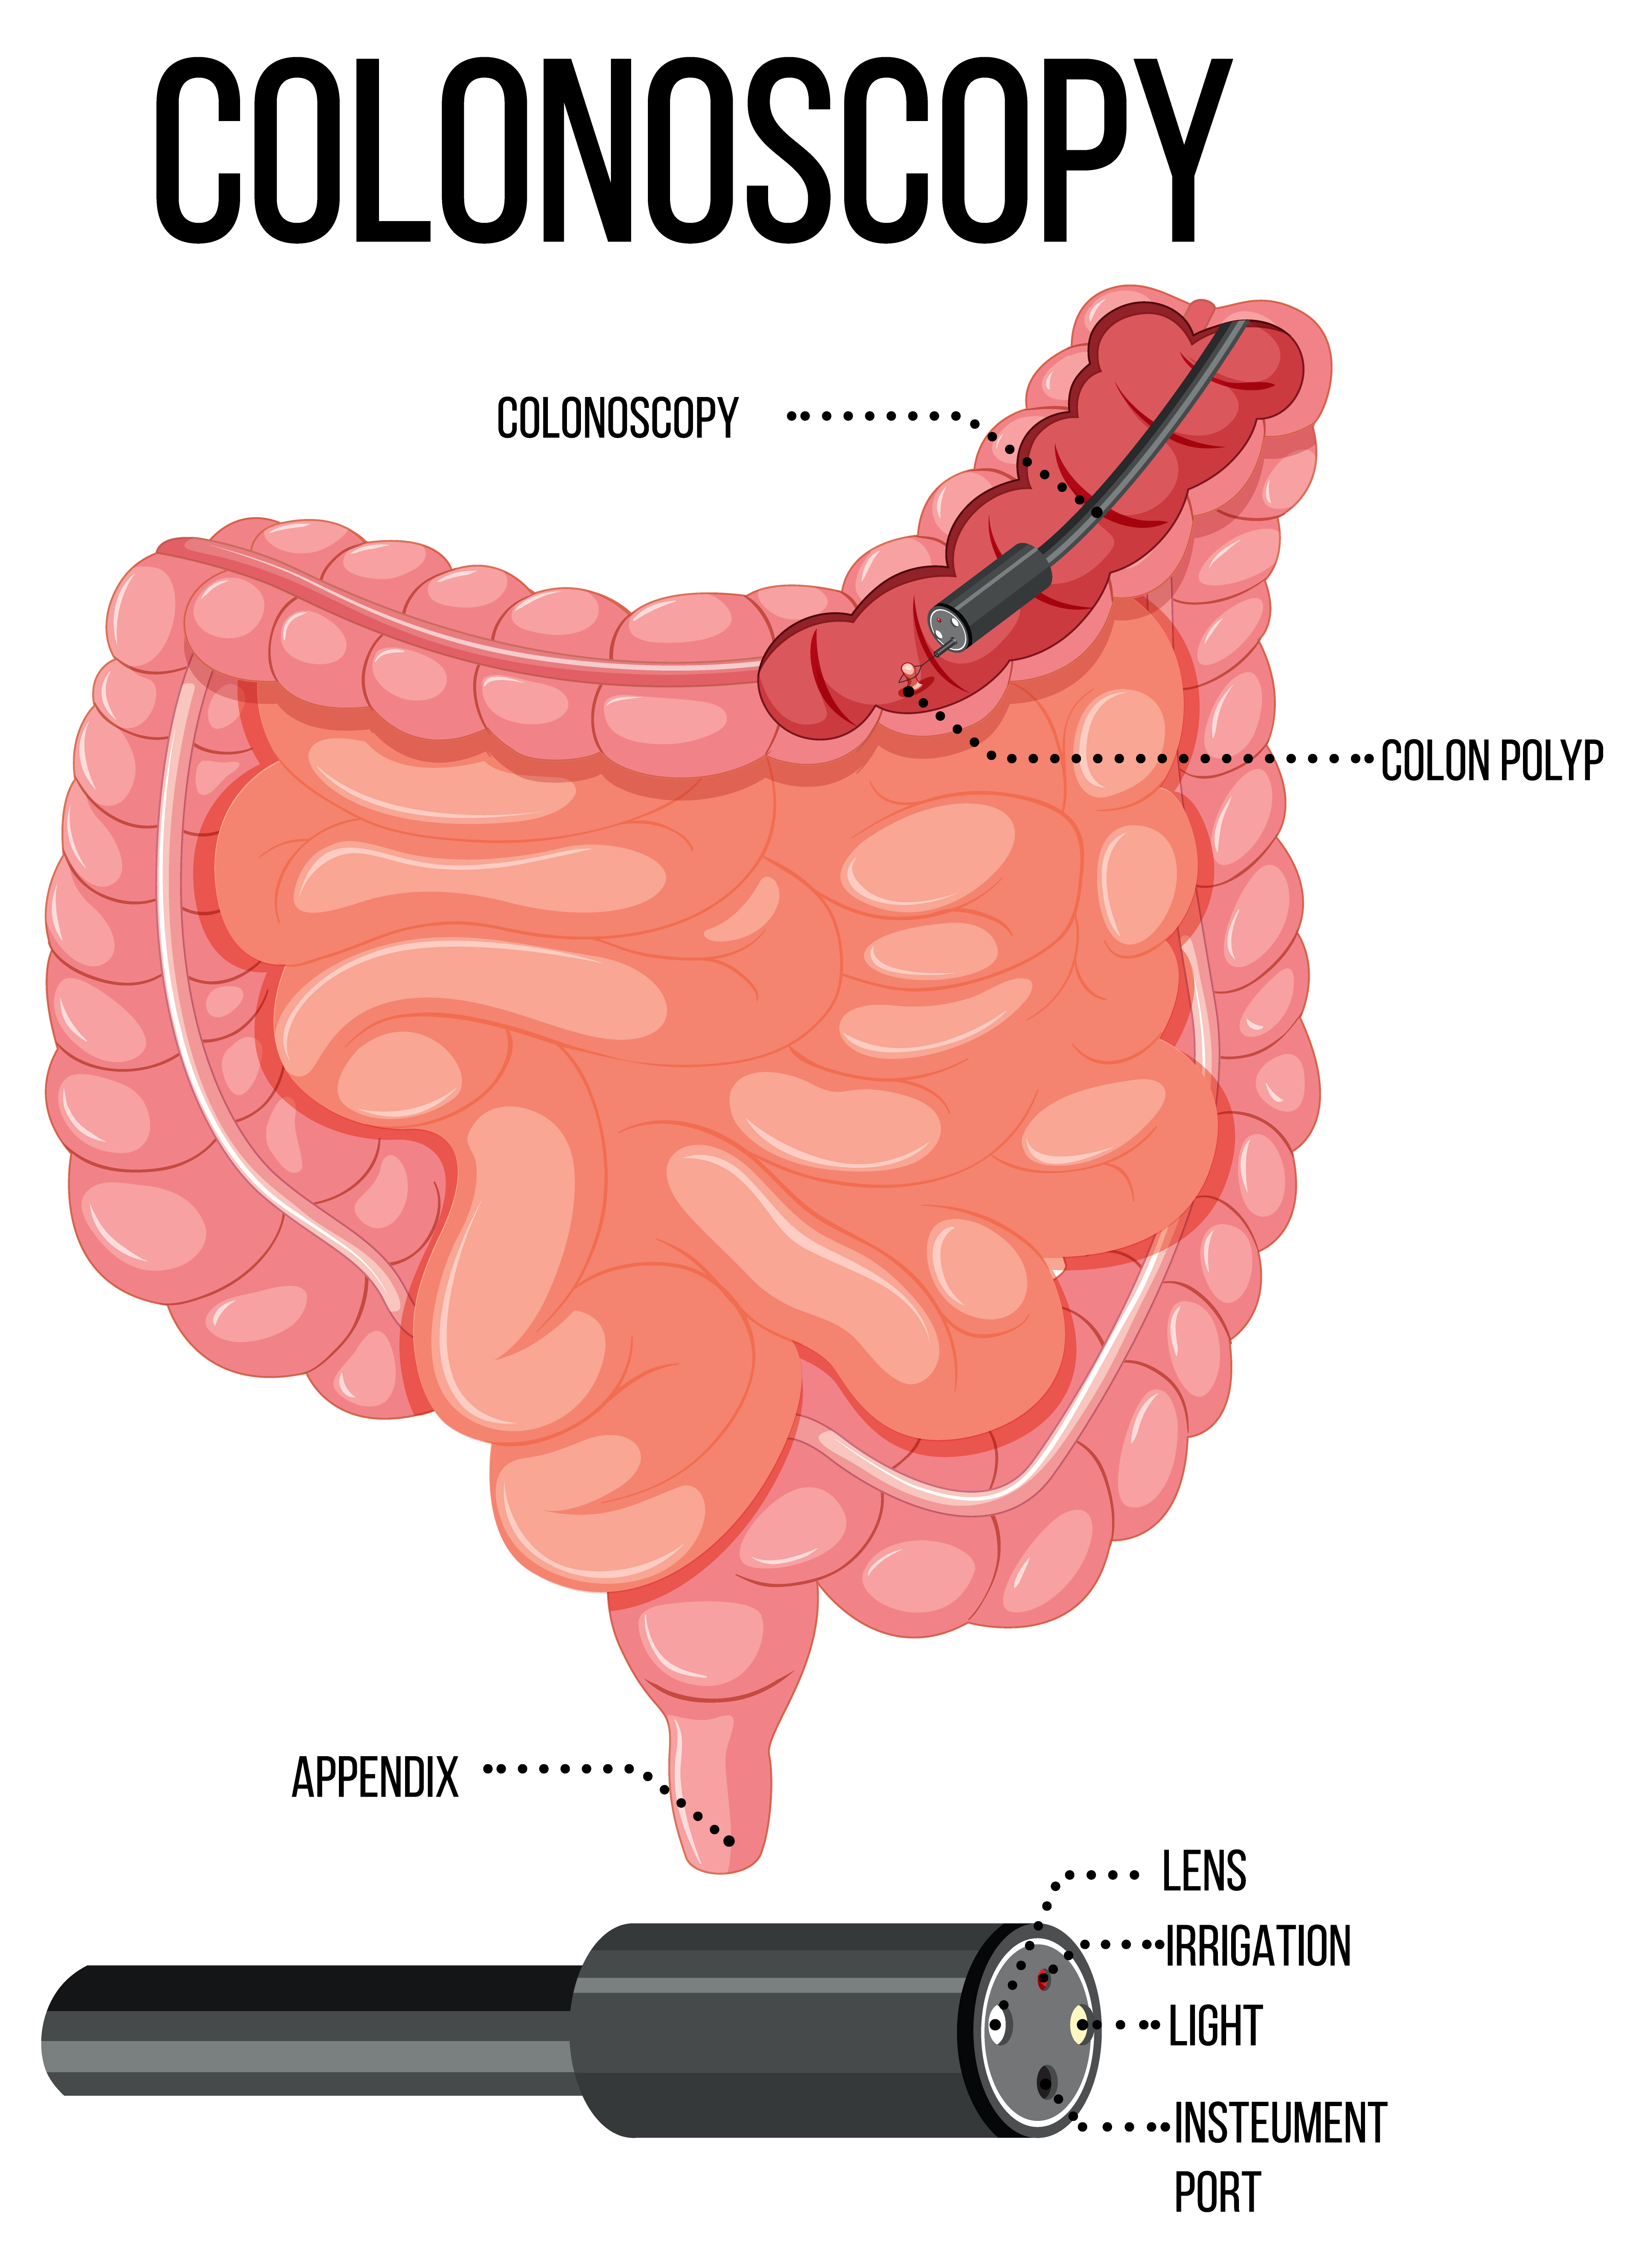 What Are the Factors That Affect the Cost of Colonoscopy Test in India?